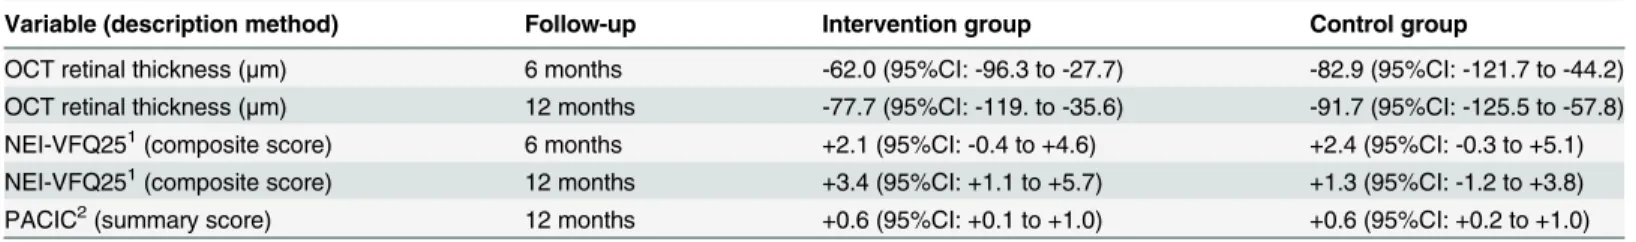 Table 2. Within group mean changes and 95% confidence intervals in secondary outcomes.